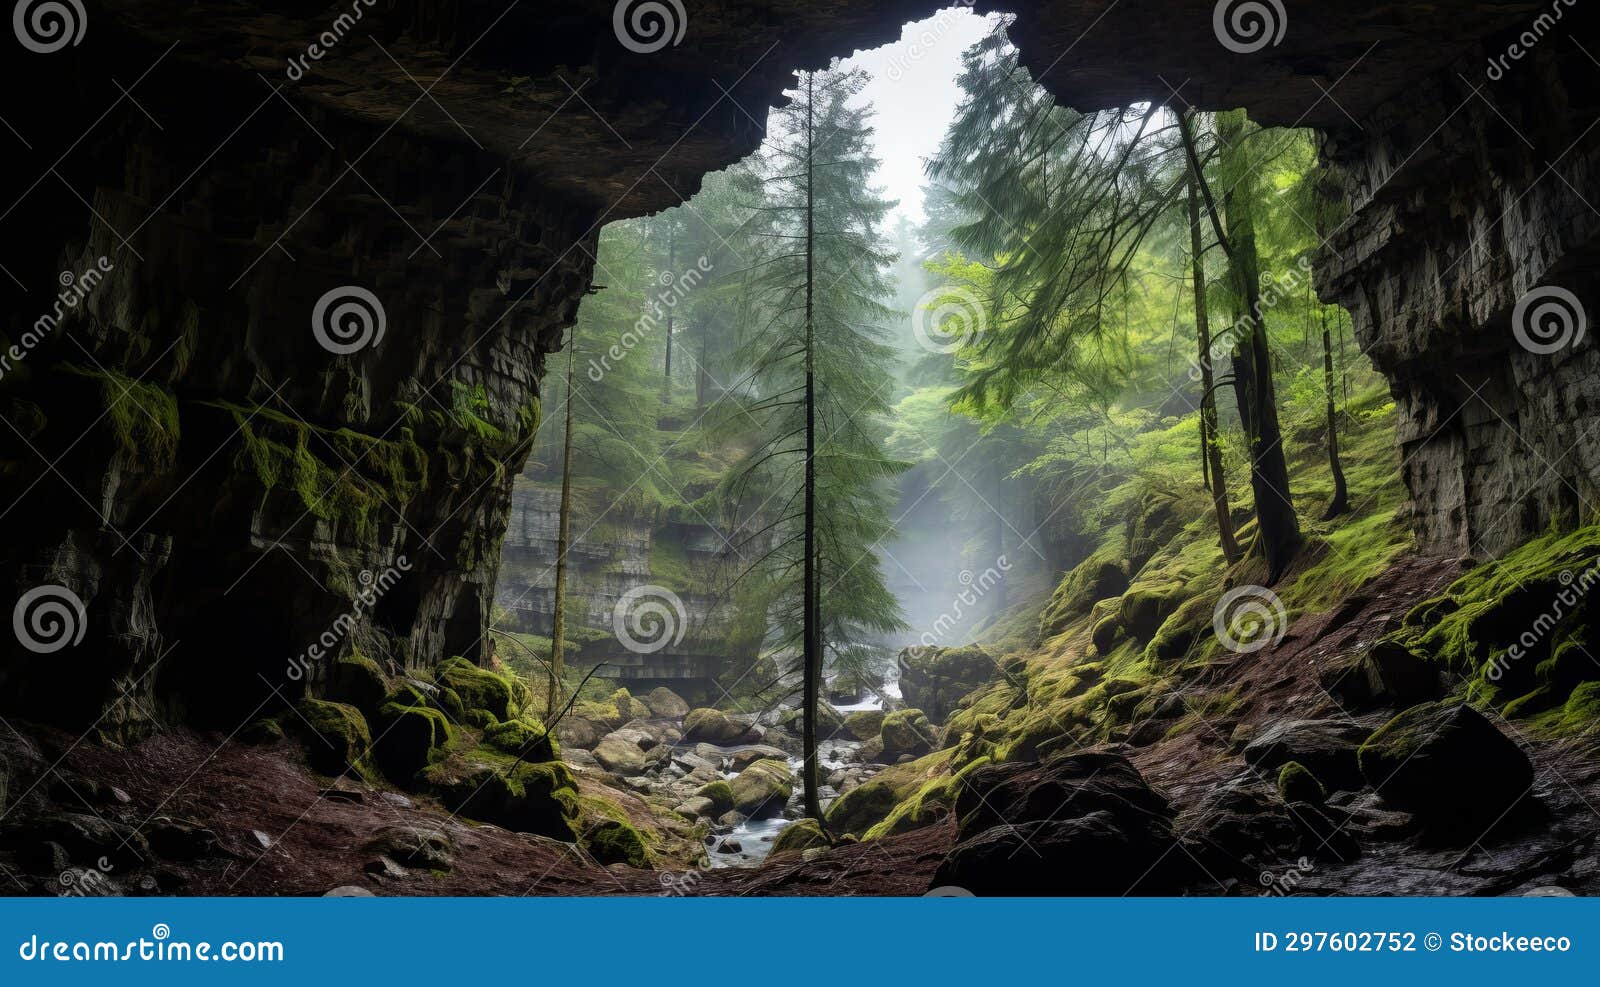 misty cave with trees and moss - stunning nature photography